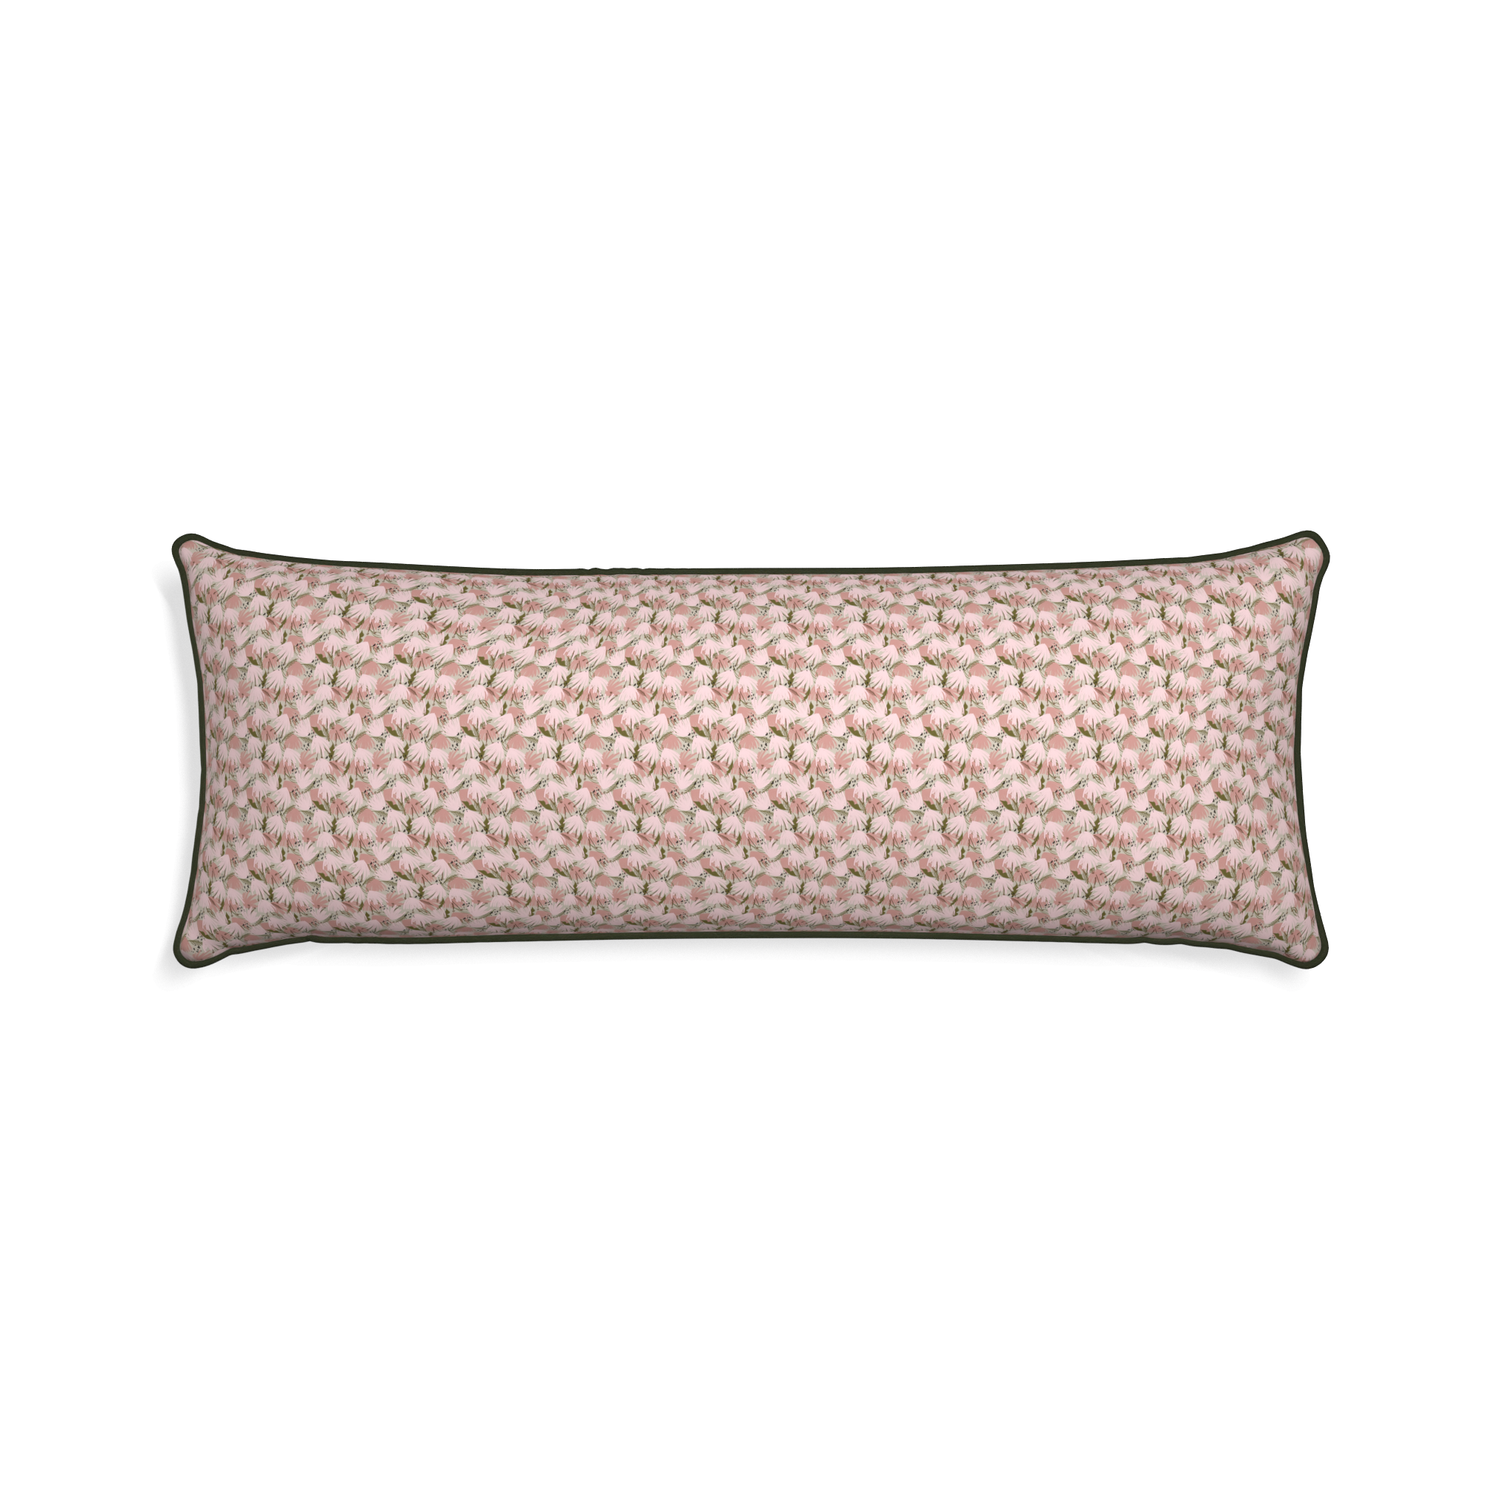 Xl-lumbar eden pink custom pink floralpillow with f piping on white background